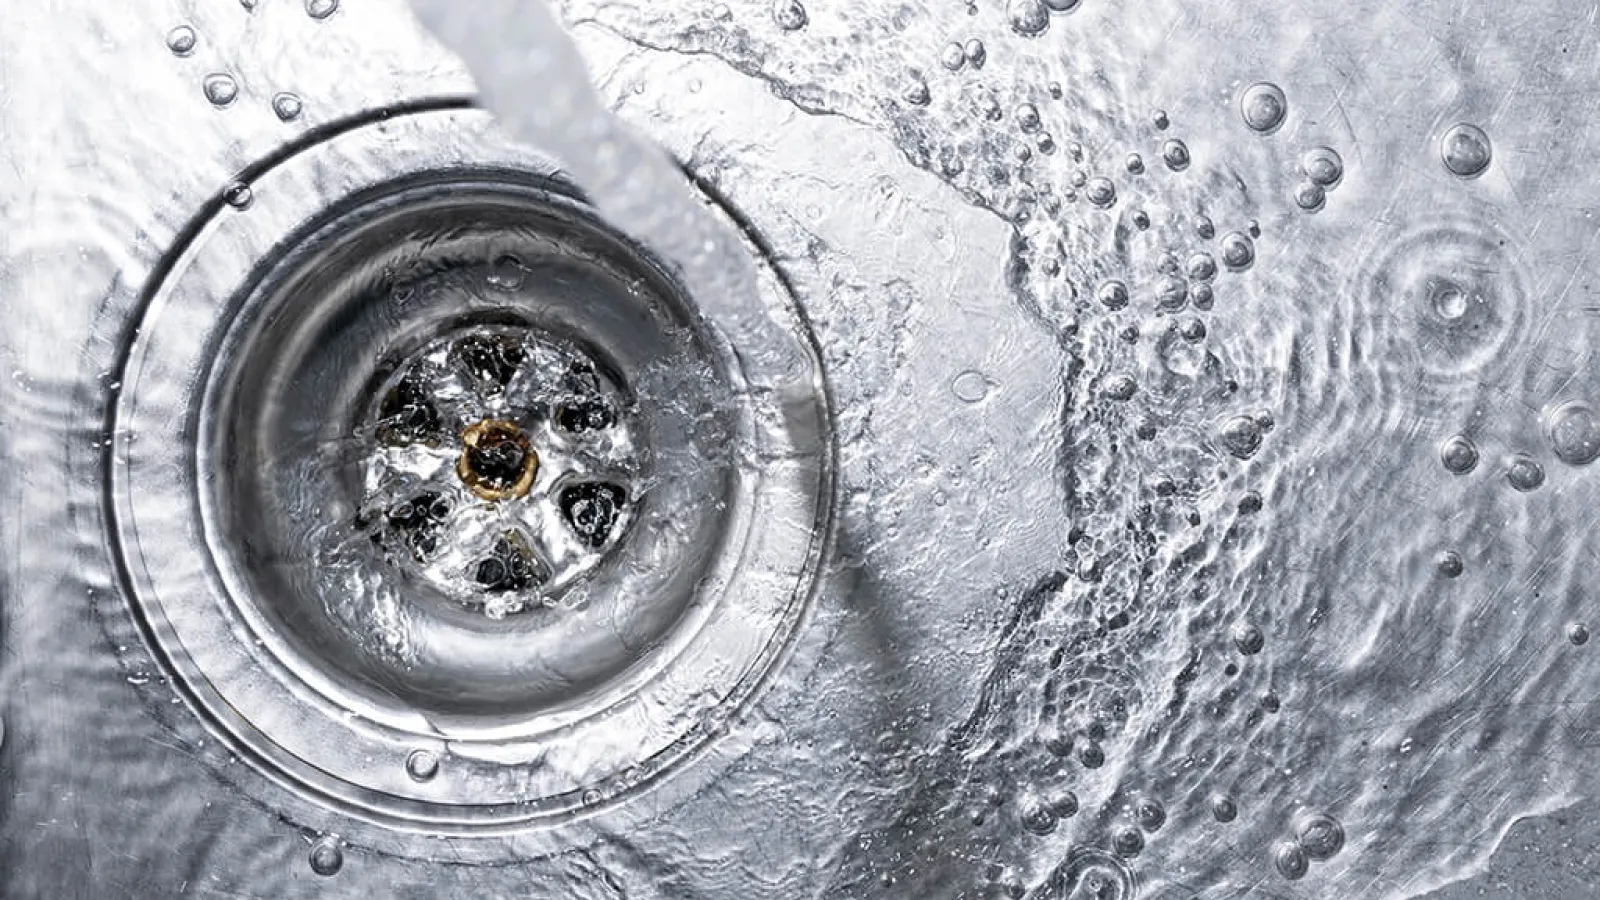 Prevent Clogged Drains at Home